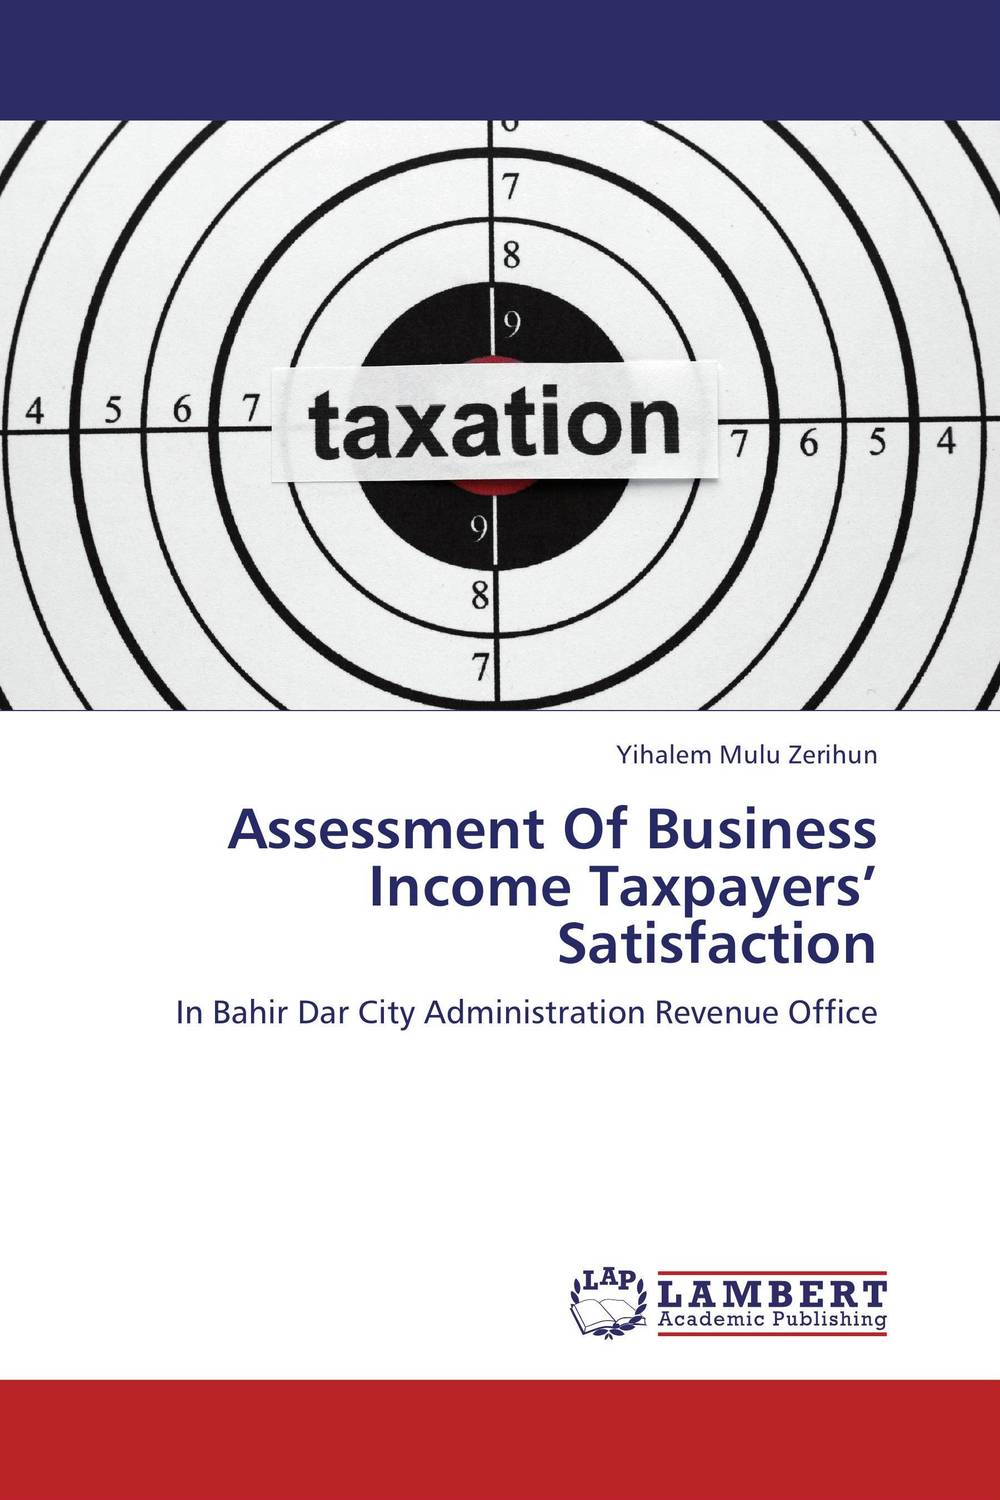 Assessment Of Business Income Taxpayers’ Satisfaction